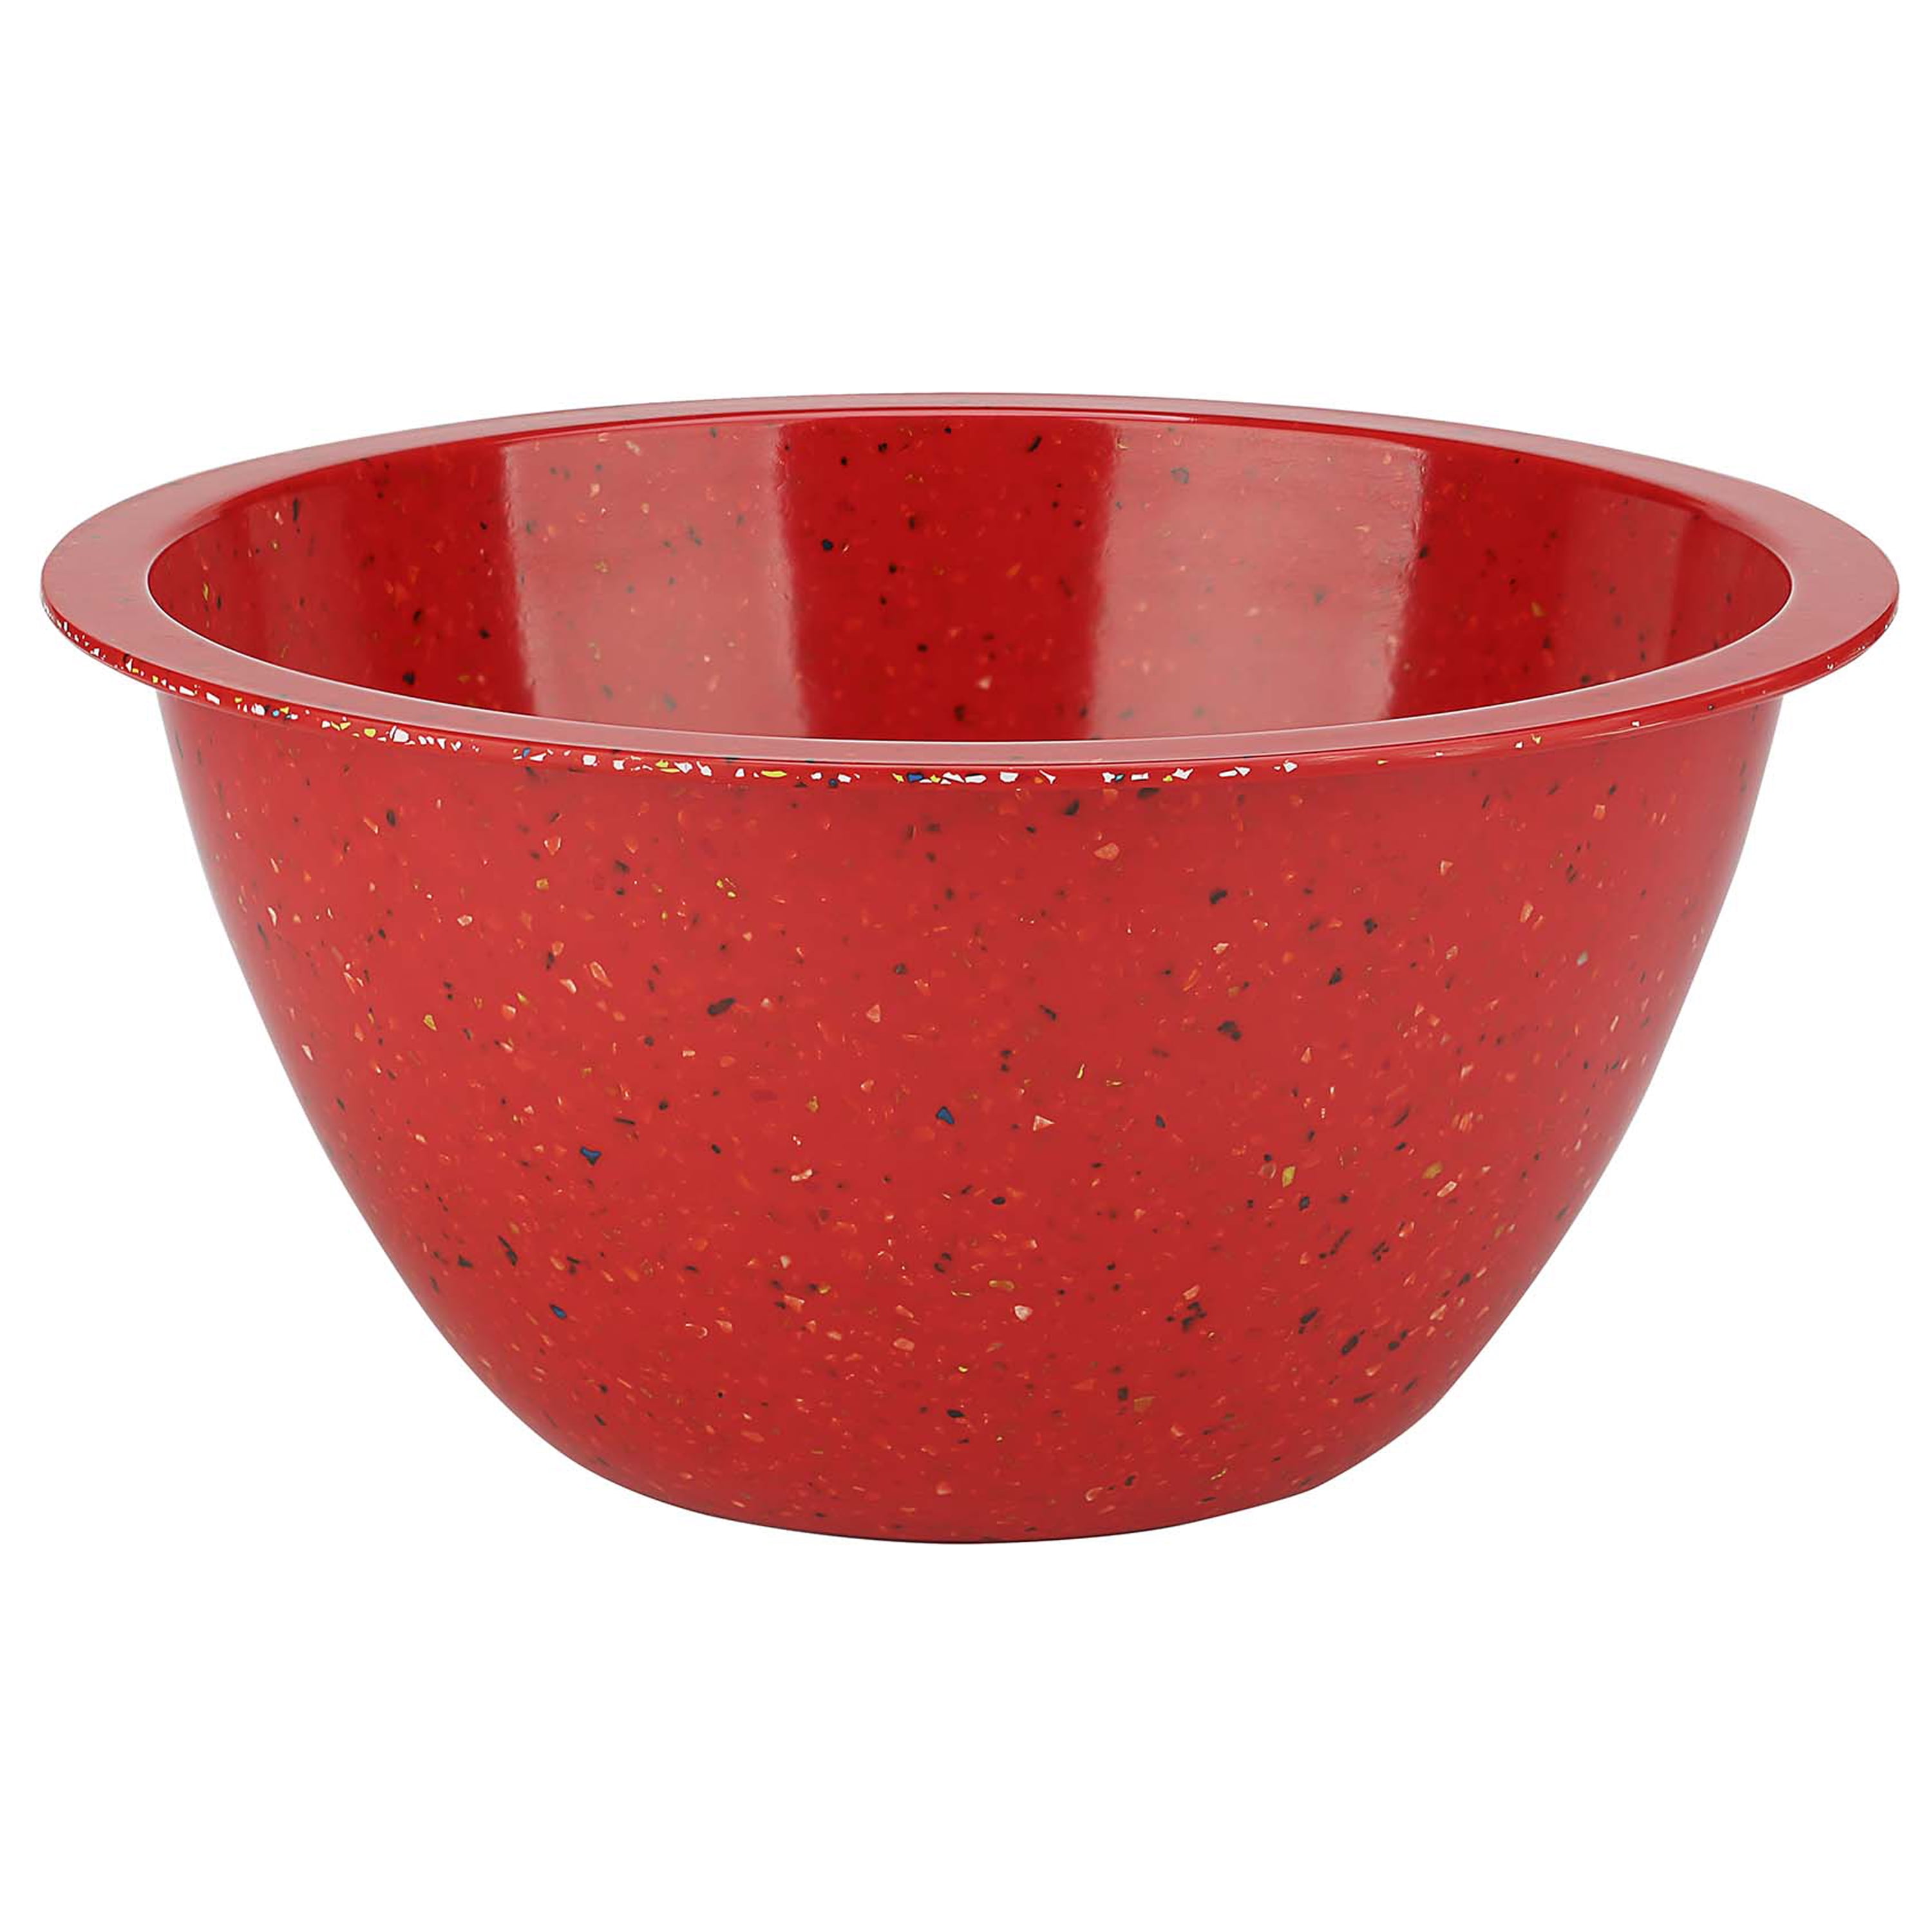 Details about   Zak Designs Red Confetti  Melamine Large Mixing Bowl 10" diameter 3 1/2" tall 